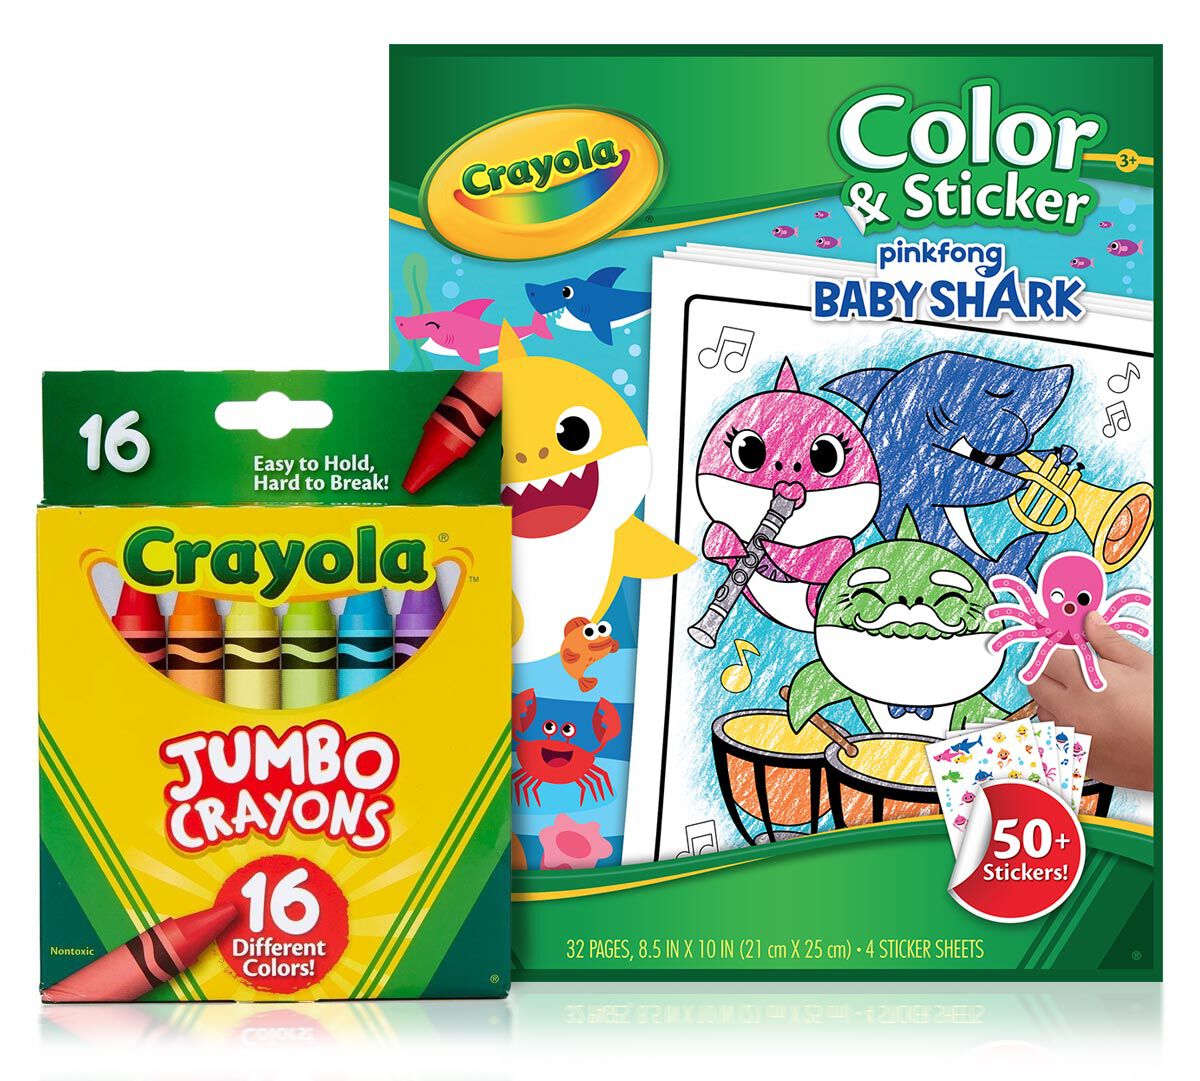 Baby Shark Color & Sticker Book with Jumbo Crayons